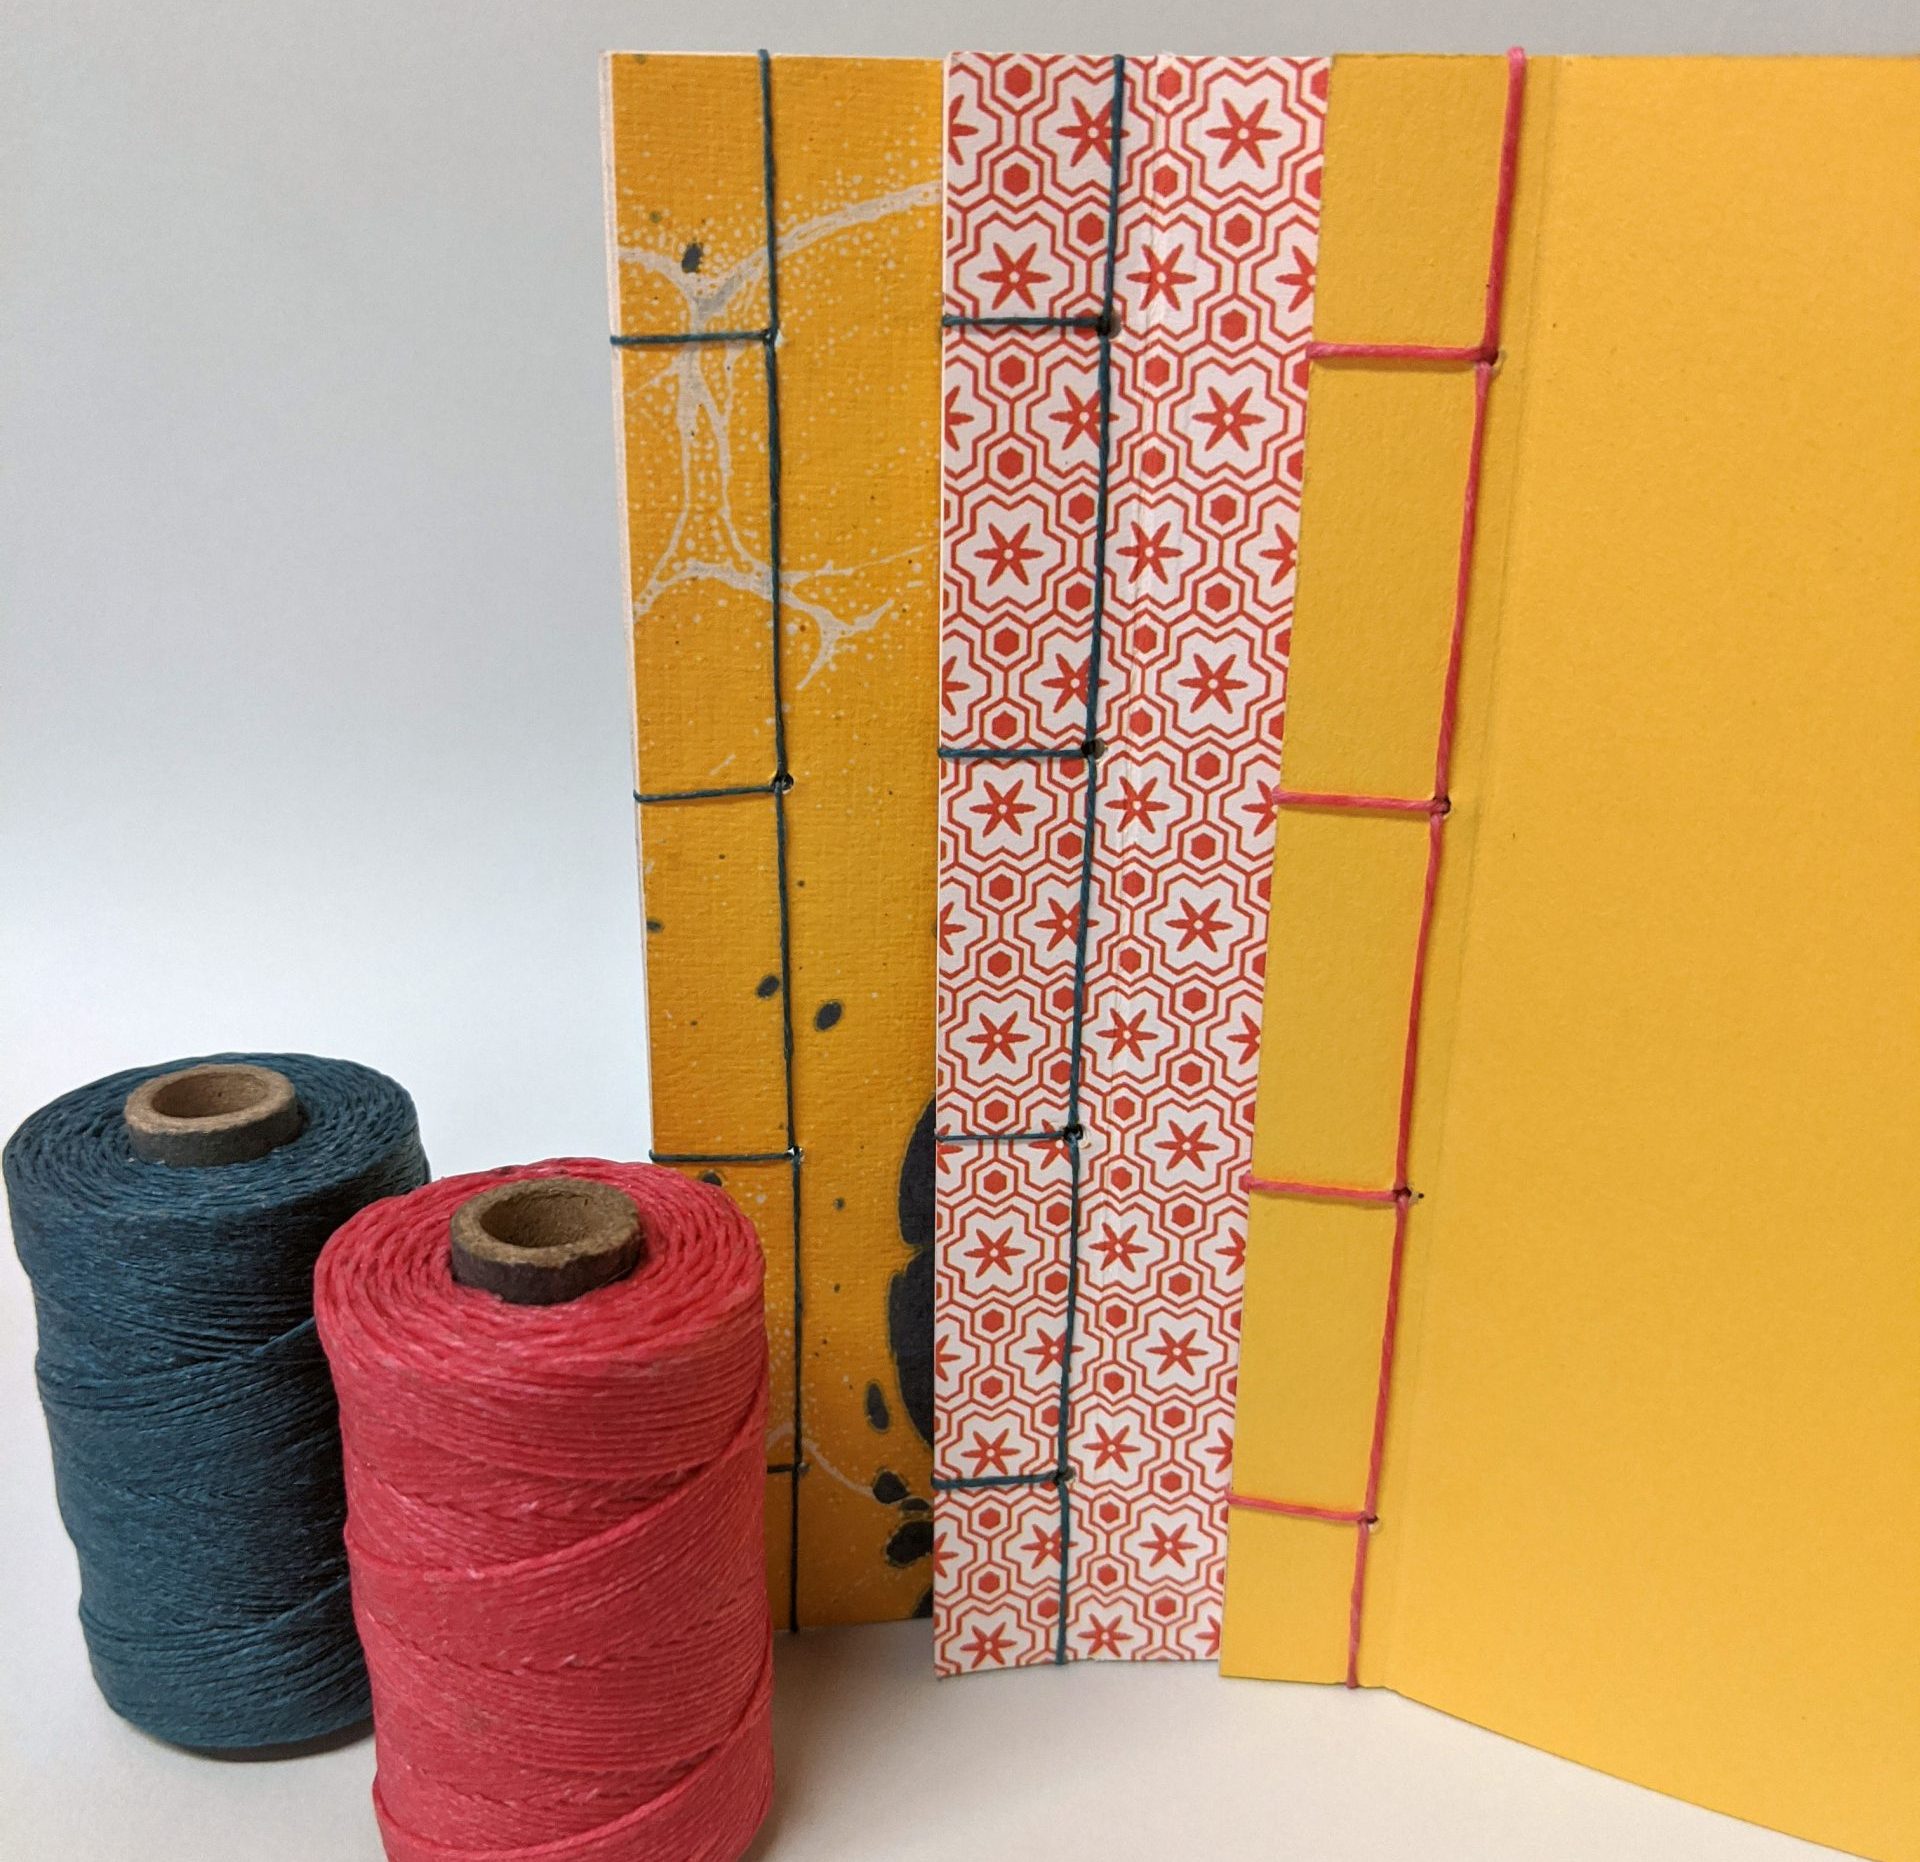 April Bookmaking Happy Hour